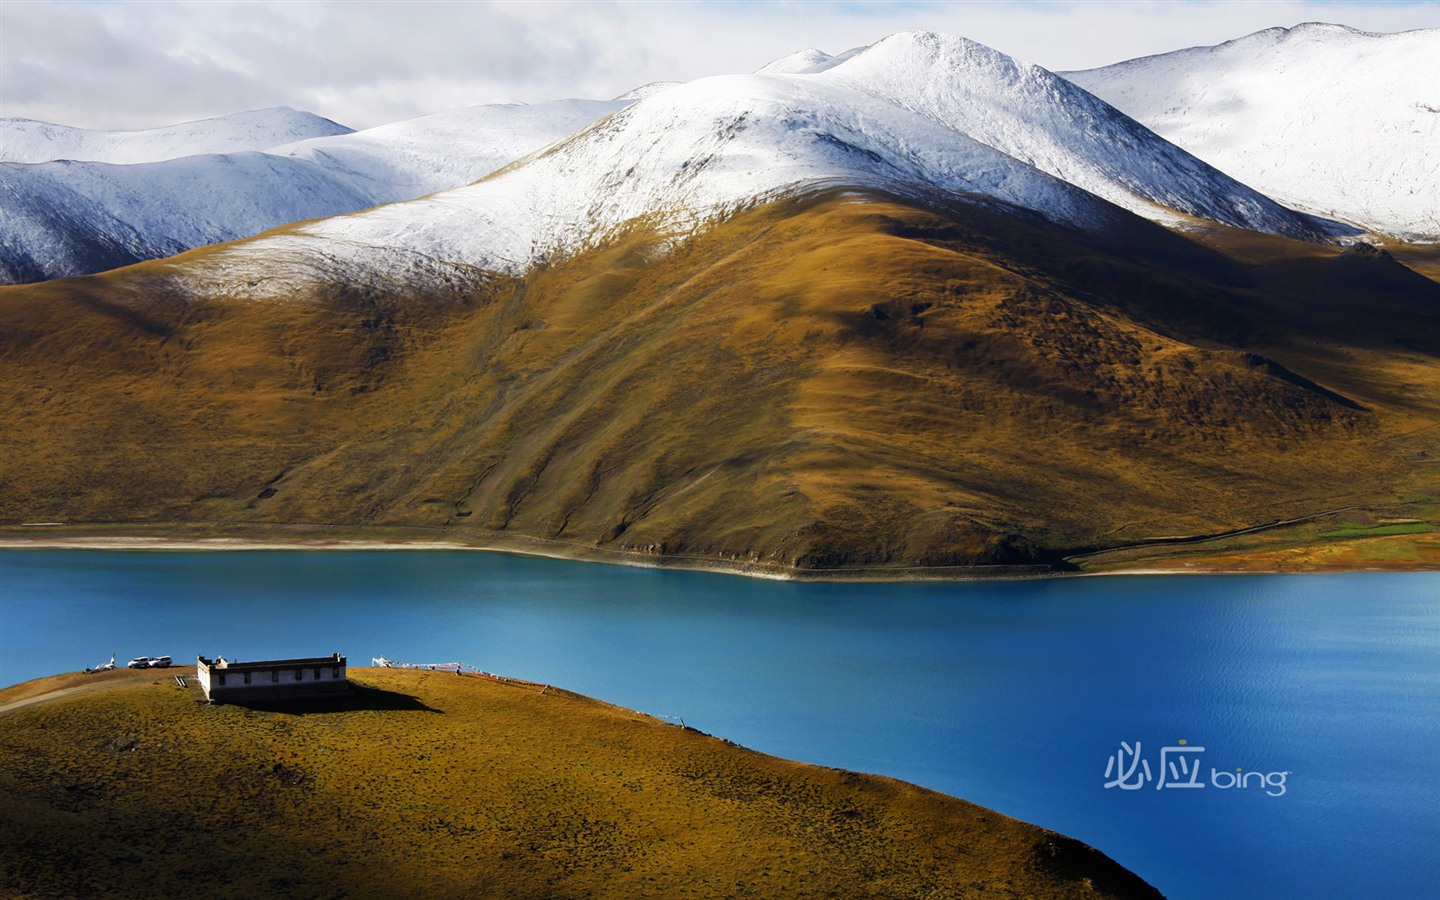 Best of Bing Wallpapers: China #14 - 1440x900